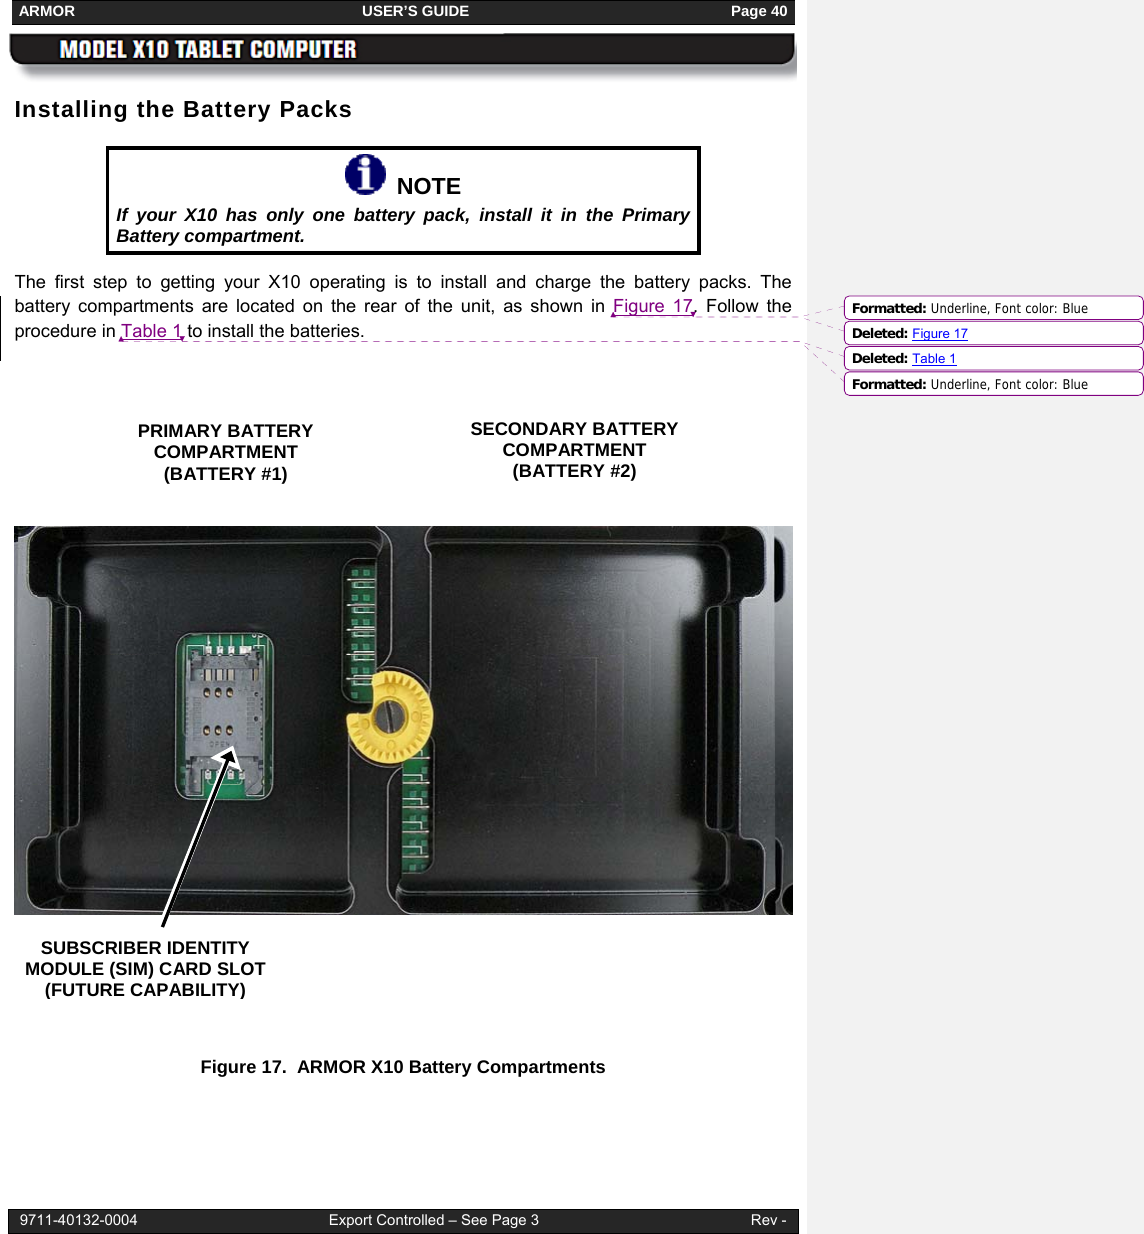 ARMOR                                                                     USER’S GUIDE                                                               Page 40  9711-40132-0004                                              Export Controlled – See Page 3                                                   Rev - Installing the Battery Packs   NOTE If your X10 has only one battery pack, install it in the Primary Battery compartment. The first step to getting your X10 operating is to install and charge the battery packs. The battery compartments are located on the rear of the unit, as shown in Figure 17. Follow the procedure in Table 1 to install the batteries.        Figure 17.  ARMOR X10 Battery Compartments   PRIMARY BATTERY  COMPARTMENT (BATTERY #1) SECONDARY BATTERY COMPARTMENT (BATTERY #2)  SUBSCRIBER IDENTITY MODULE (SIM) CARD SLOT (FUTURE CAPABILITY) Formatted: Underline, Font color: BlueDeleted: Figure 17Formatted: Underline, Font color: BlueDeleted: Table 1